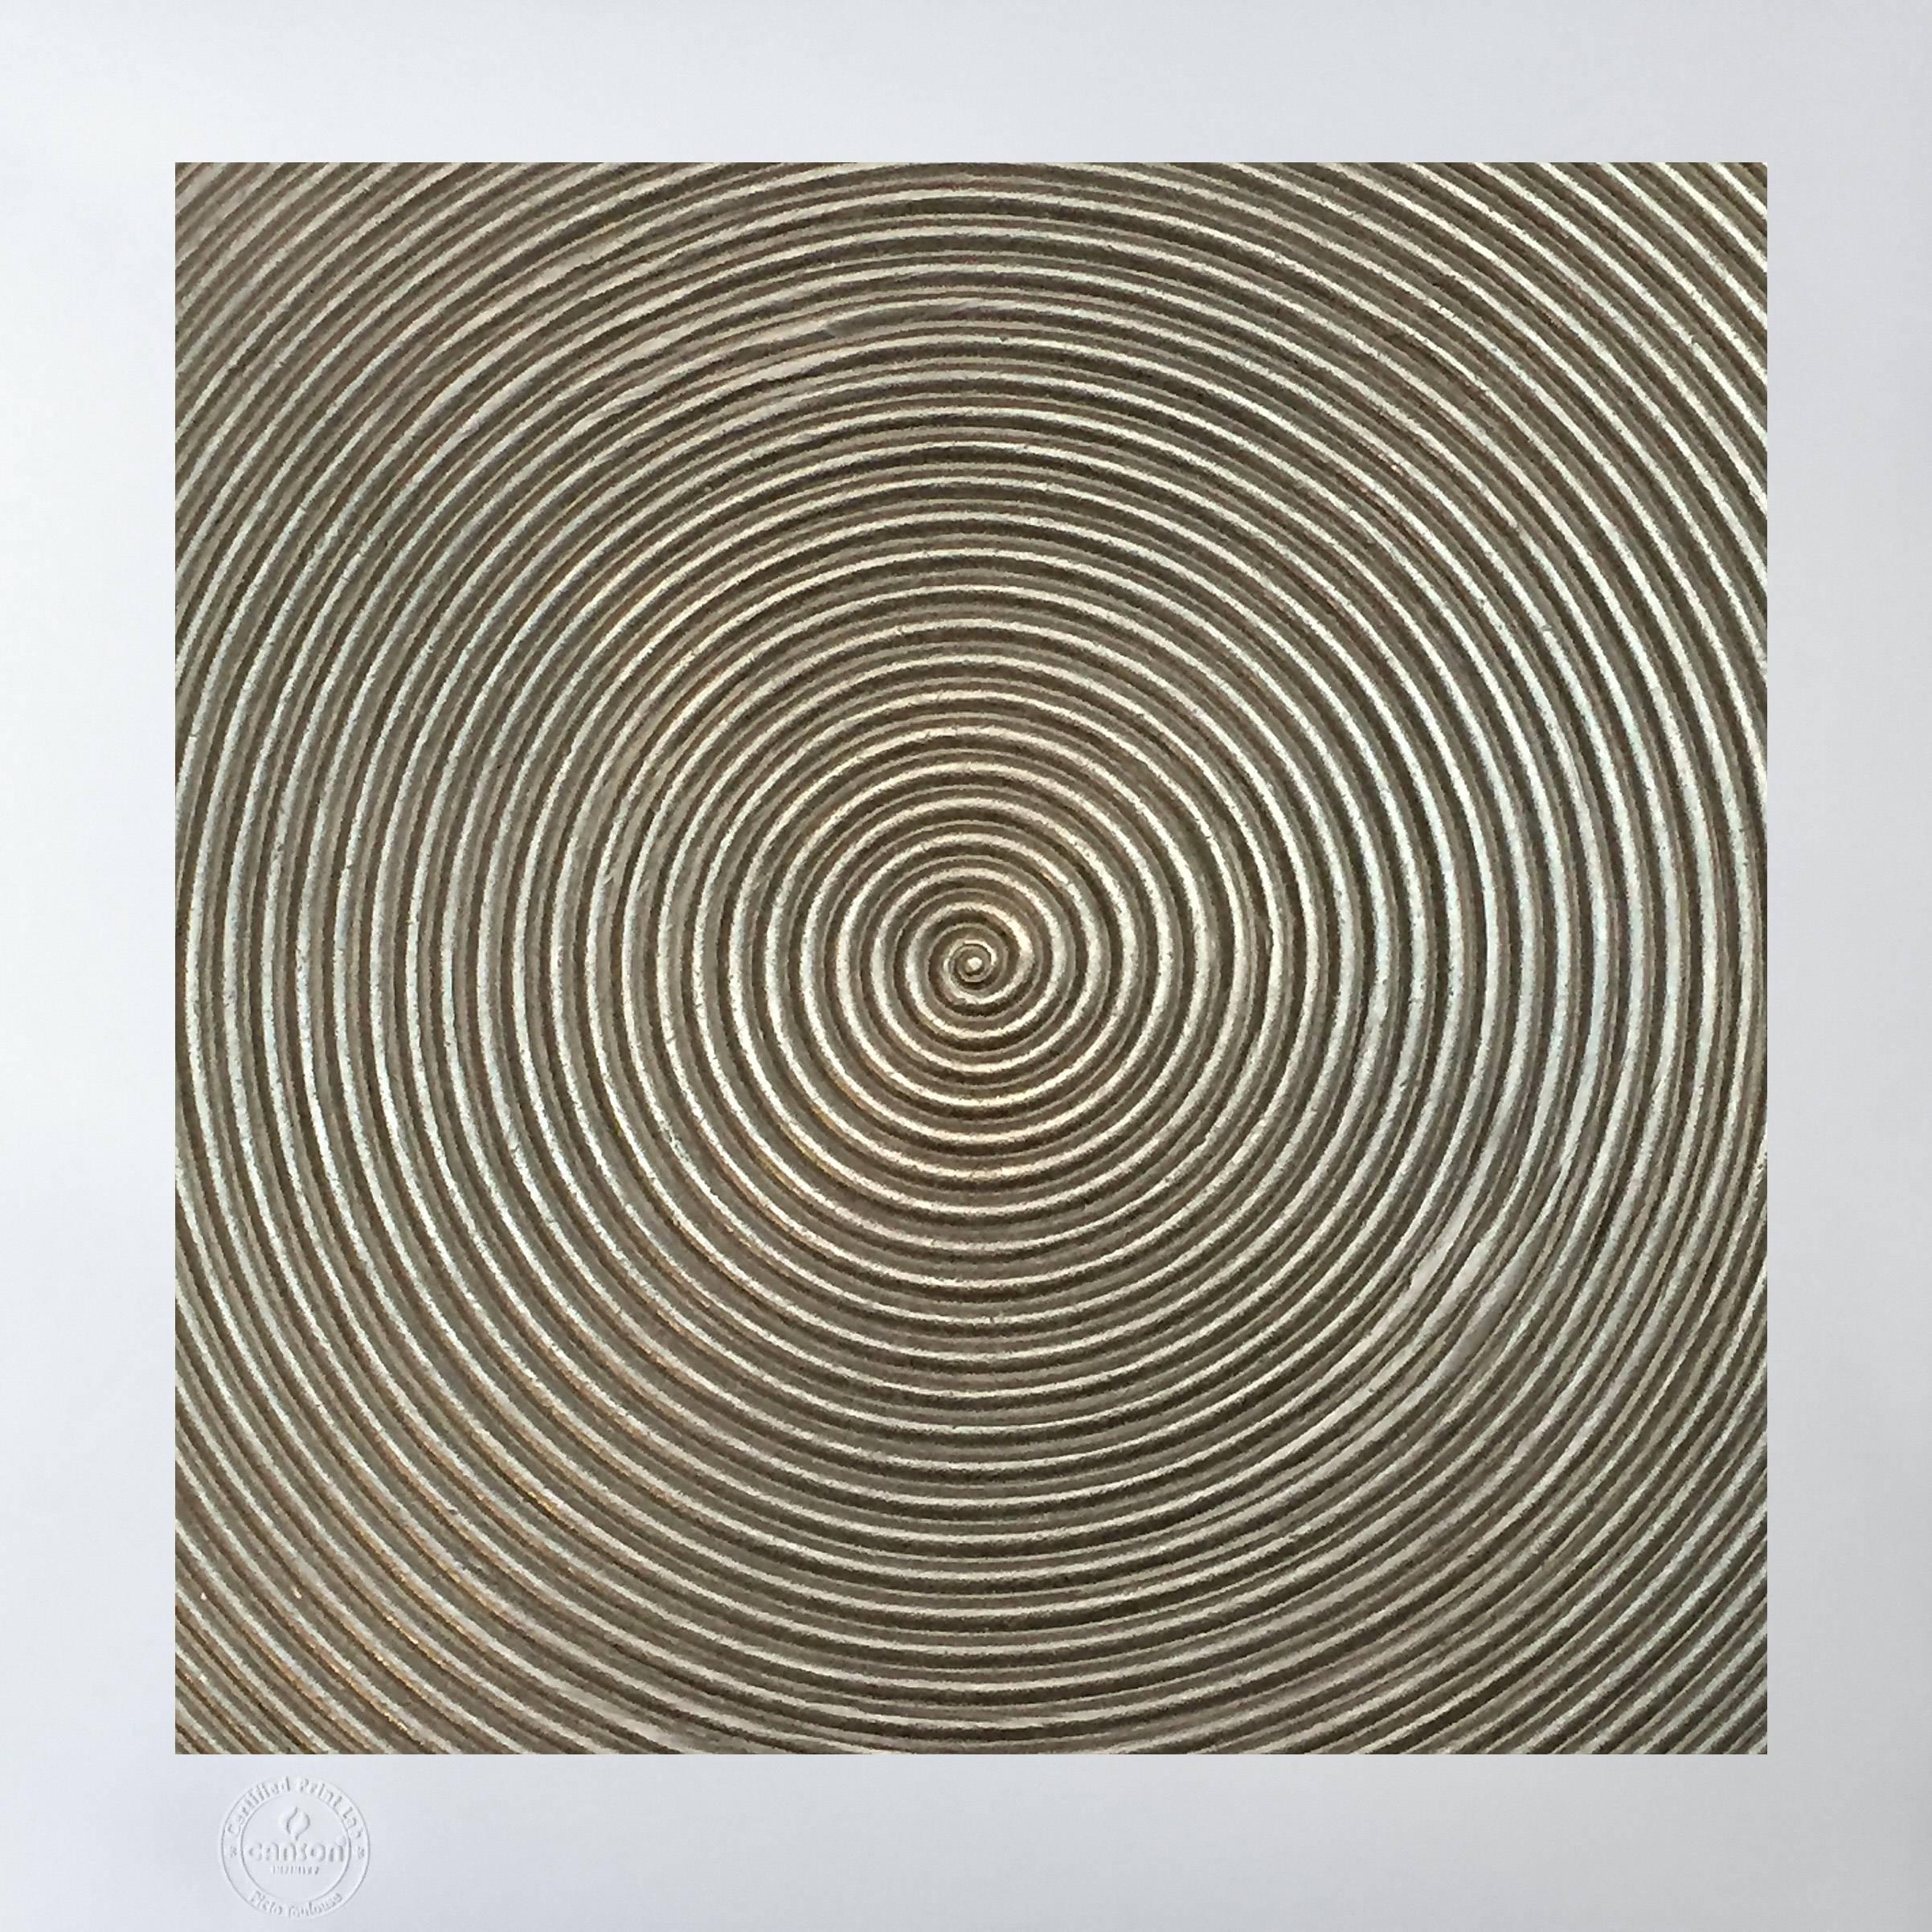 Archival pigment print on Certified Canson Fine Art infinity matte paper.

Edition of 3, delivered with certificate of authenticity. Dated, titled and numbered.

Size of the print 40 x 40 cm.
Size of the print sheet: 50 x 50 cm.

Frame not included.